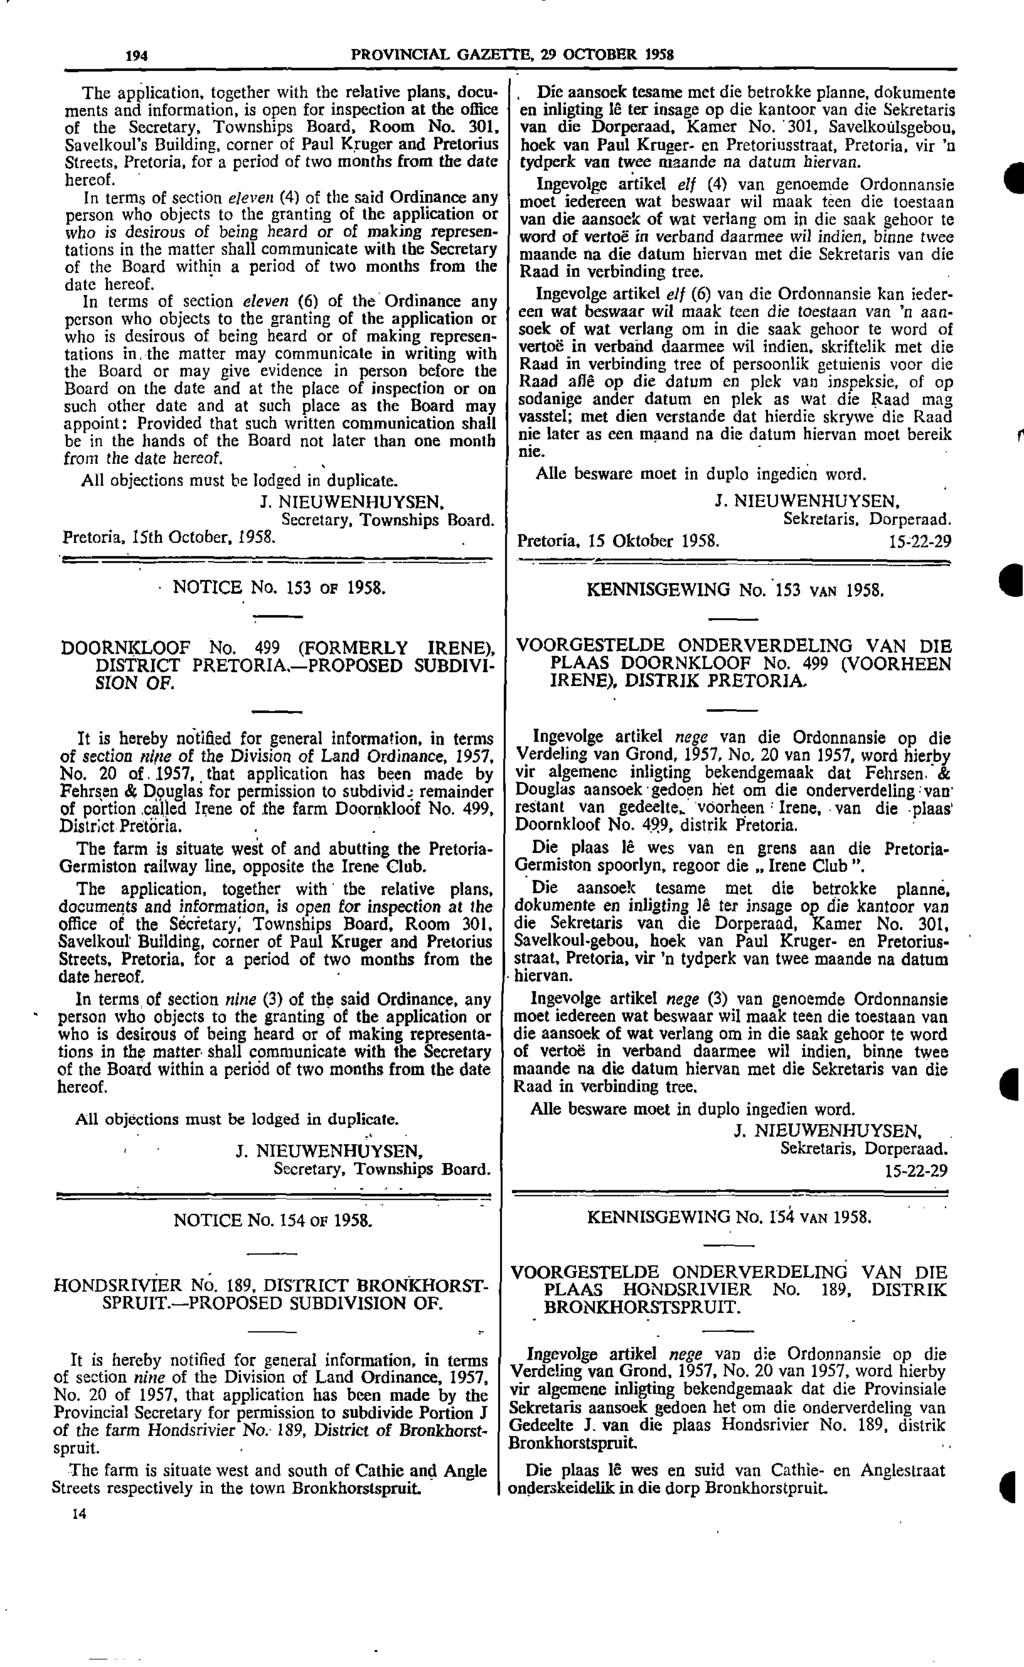 94 PROVINCIAL GAZETTE 29 OCTOBER 958 The application together with the relative plans docu Die aansoek tesame met die betrokke planne dokumente ments and information is open for inspection at the